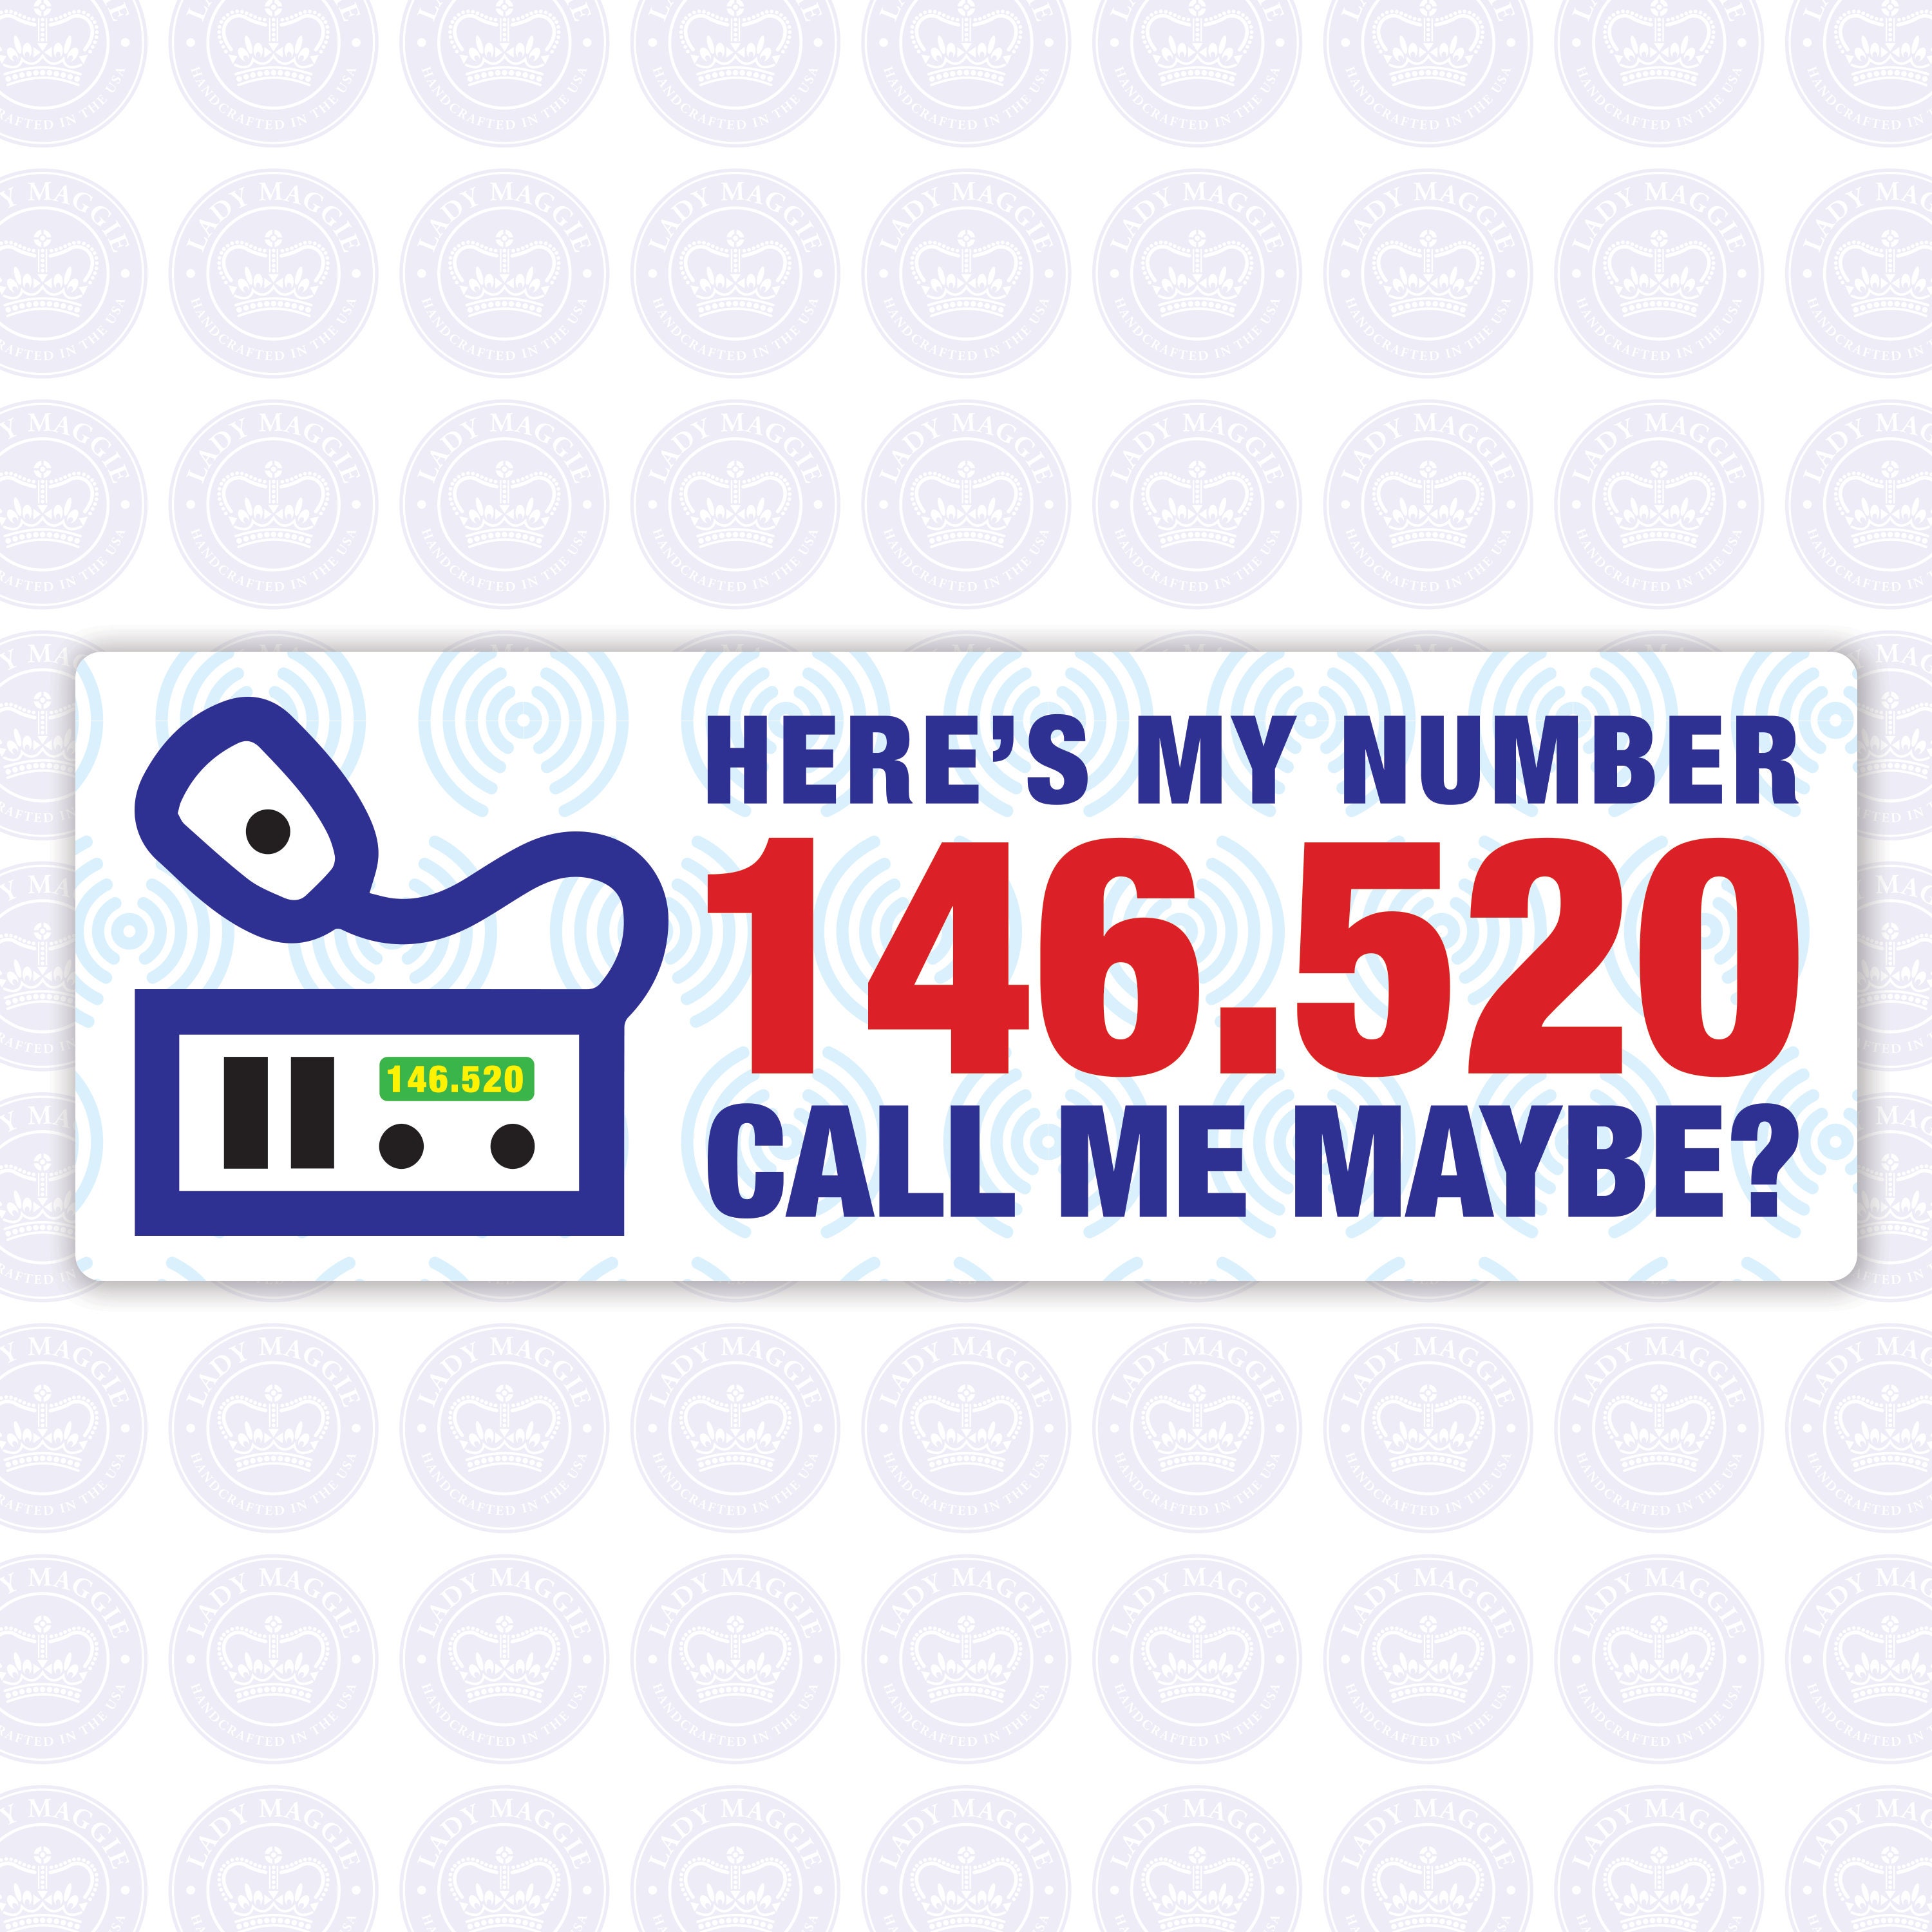 146.520 2m National Simplex Calling Frequency Decal